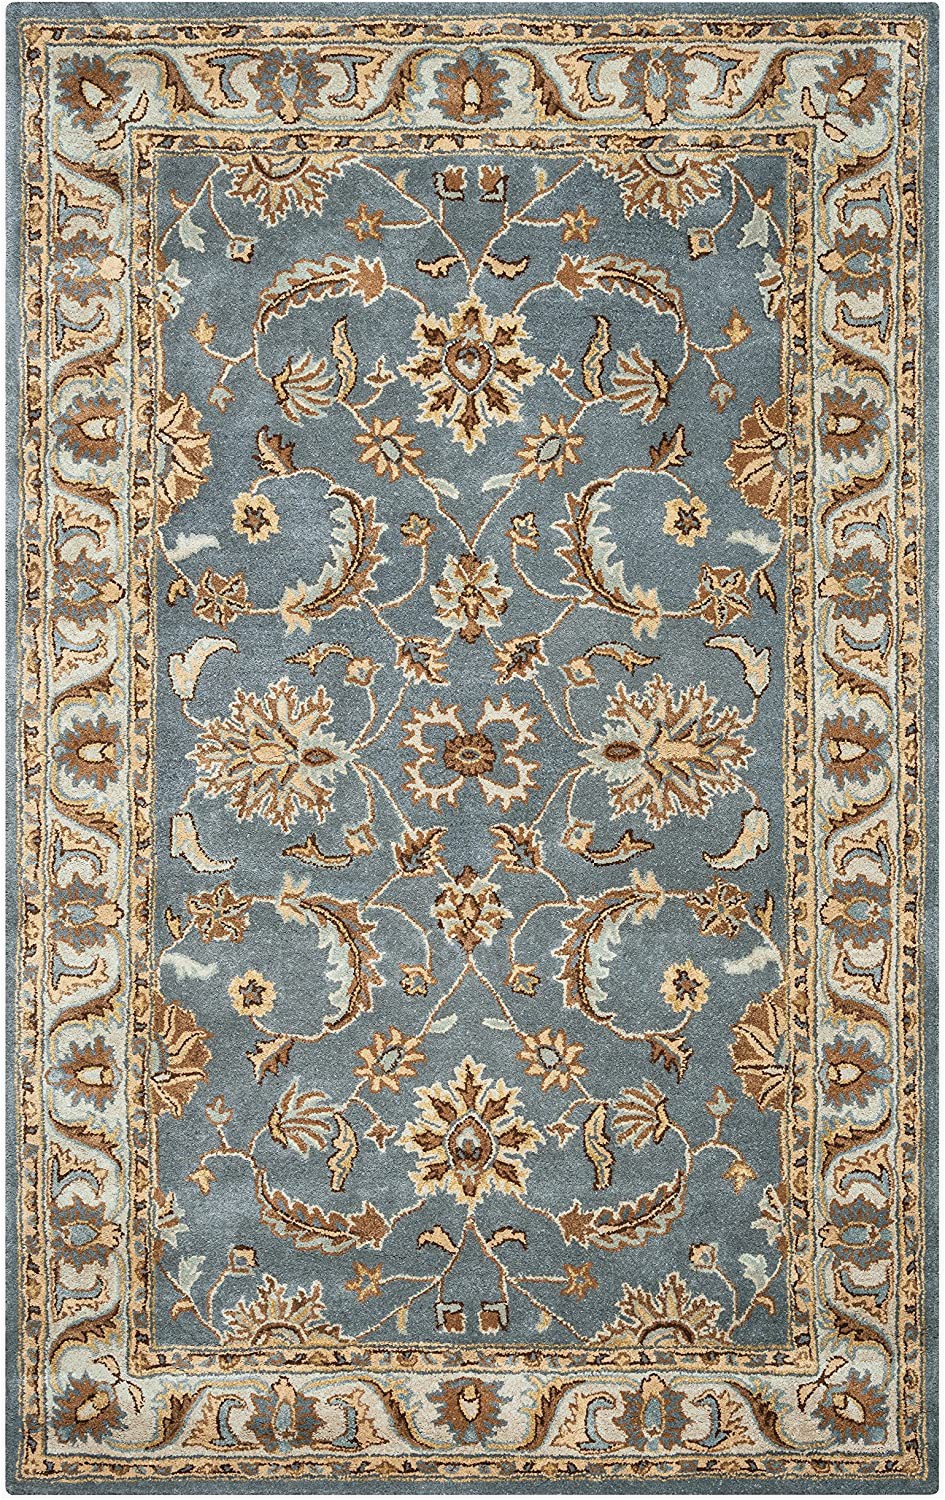 Memory Foam area Rug 8×10 Rizzy Home Volare Collection Wool area Rug 8 X 10 Blue Brown Tan Blue Lt Teal Lt Brown Border